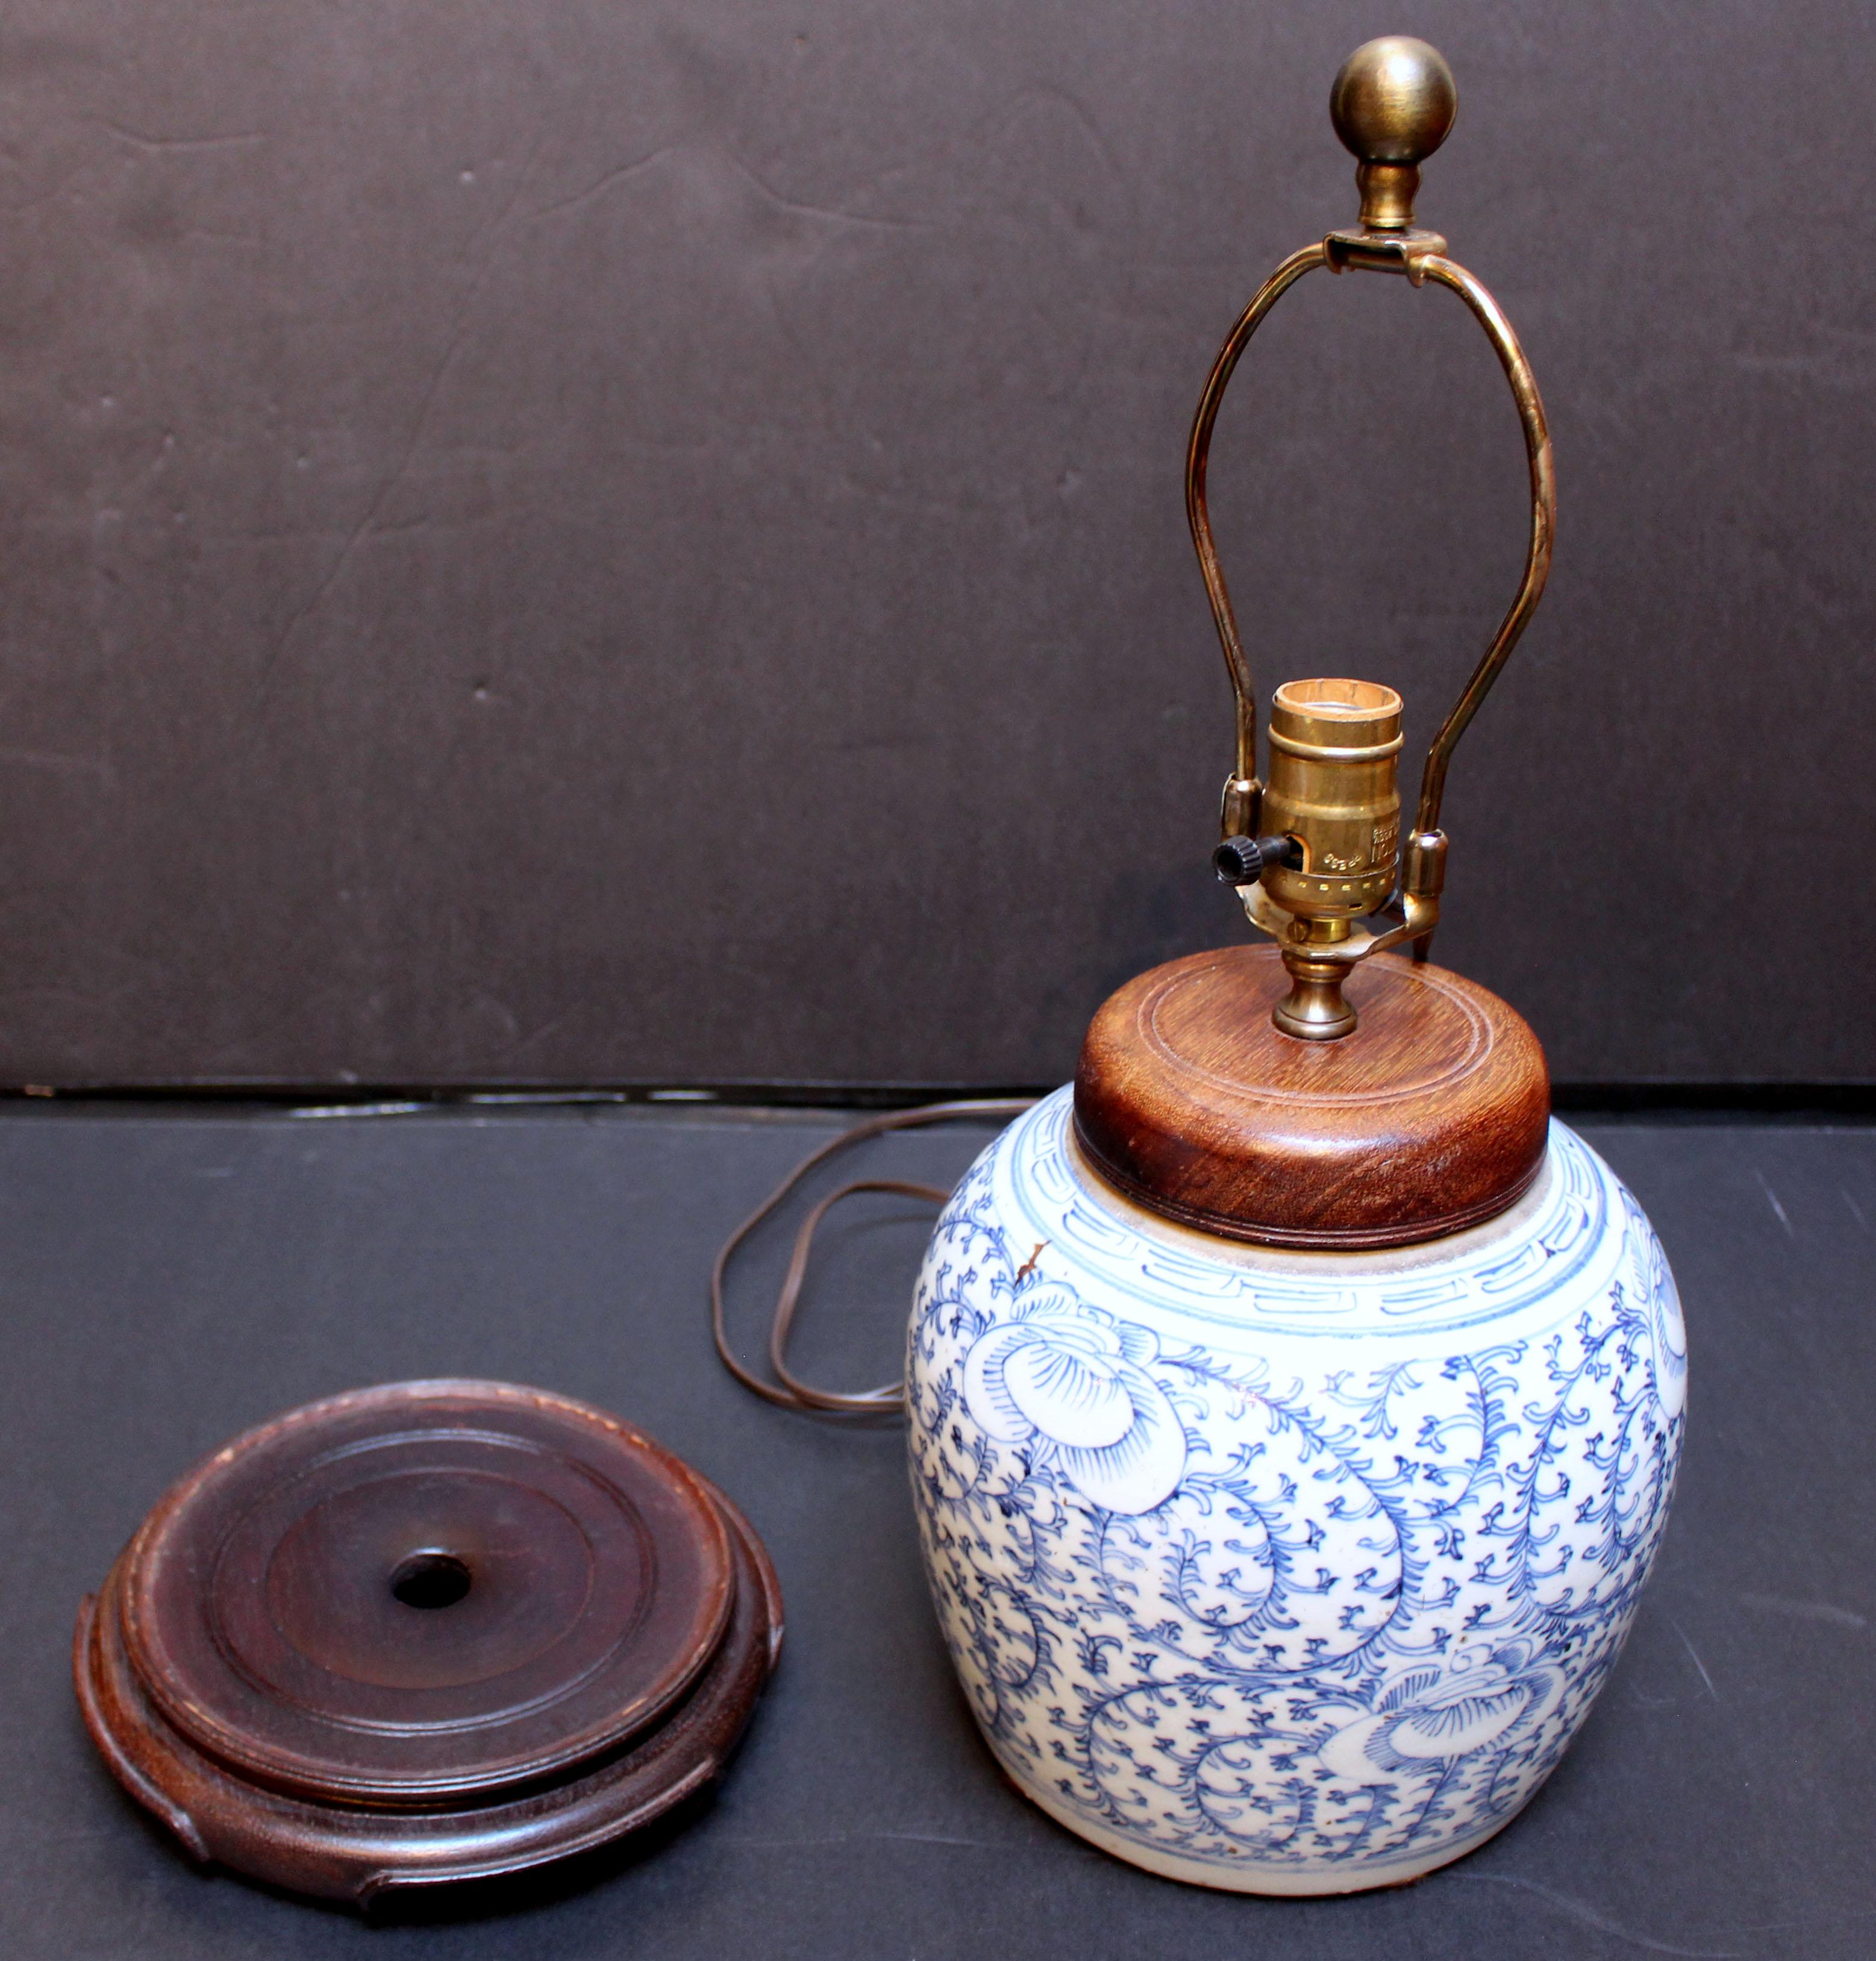 Late 19th century Chinese blue & white ginger jar lamp. Of good size. Lamped in the 20th century. The whole with scrolling naturalistic design. Turned wooden top. Kiln pops & marks.
12 3/8